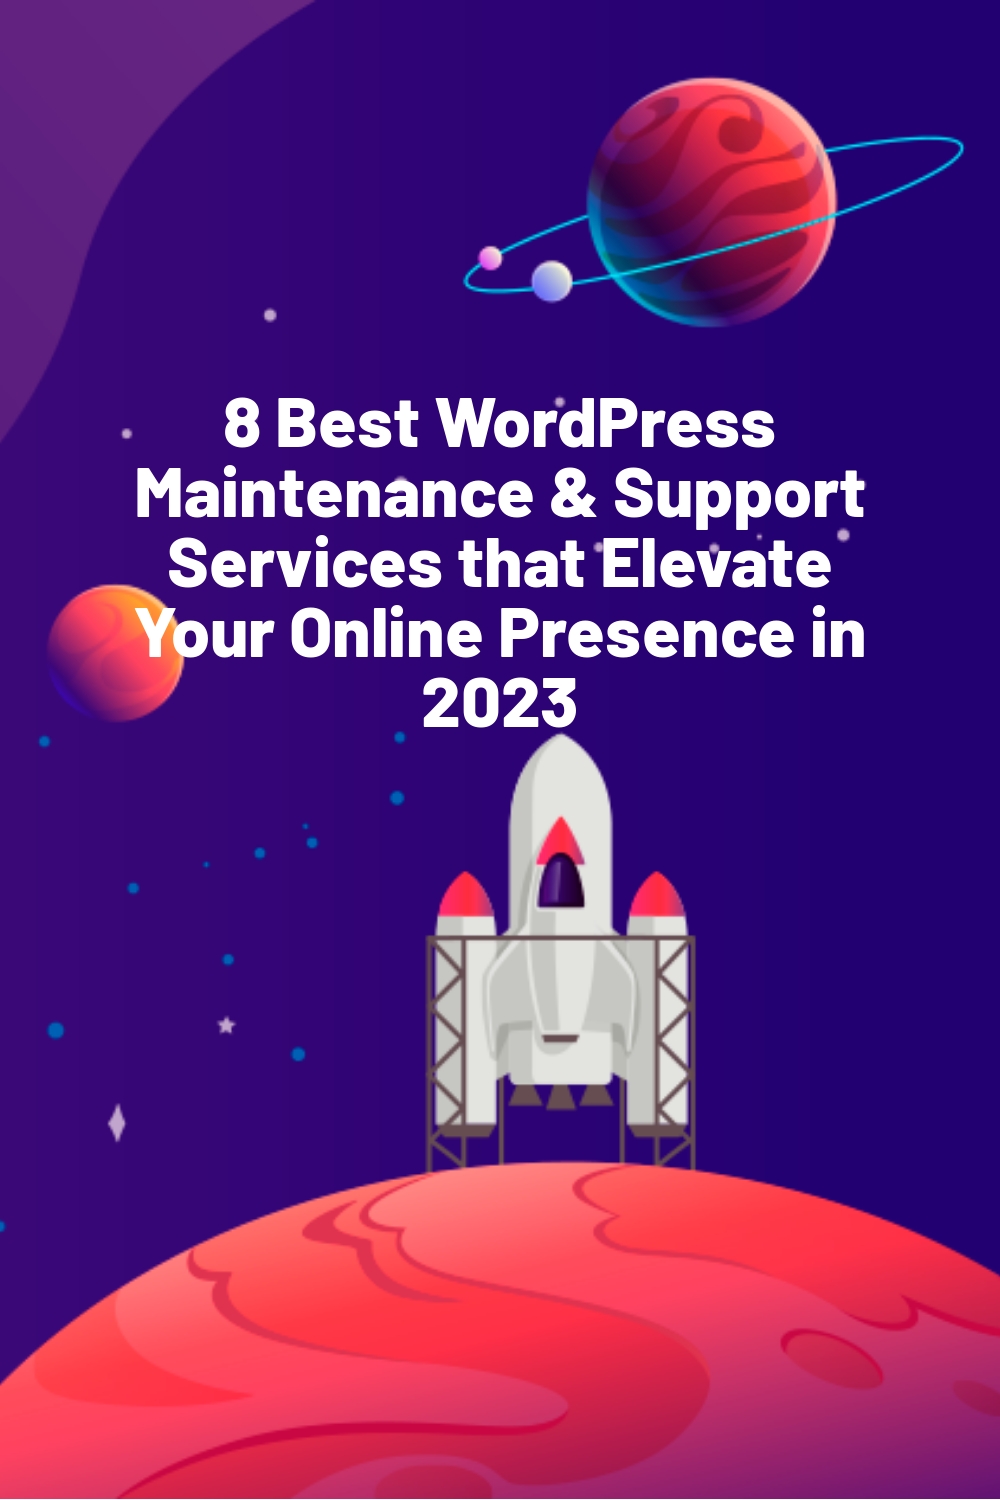 8 Best WordPress Maintenance & Support Services that Elevate Your Online Presence in 2023